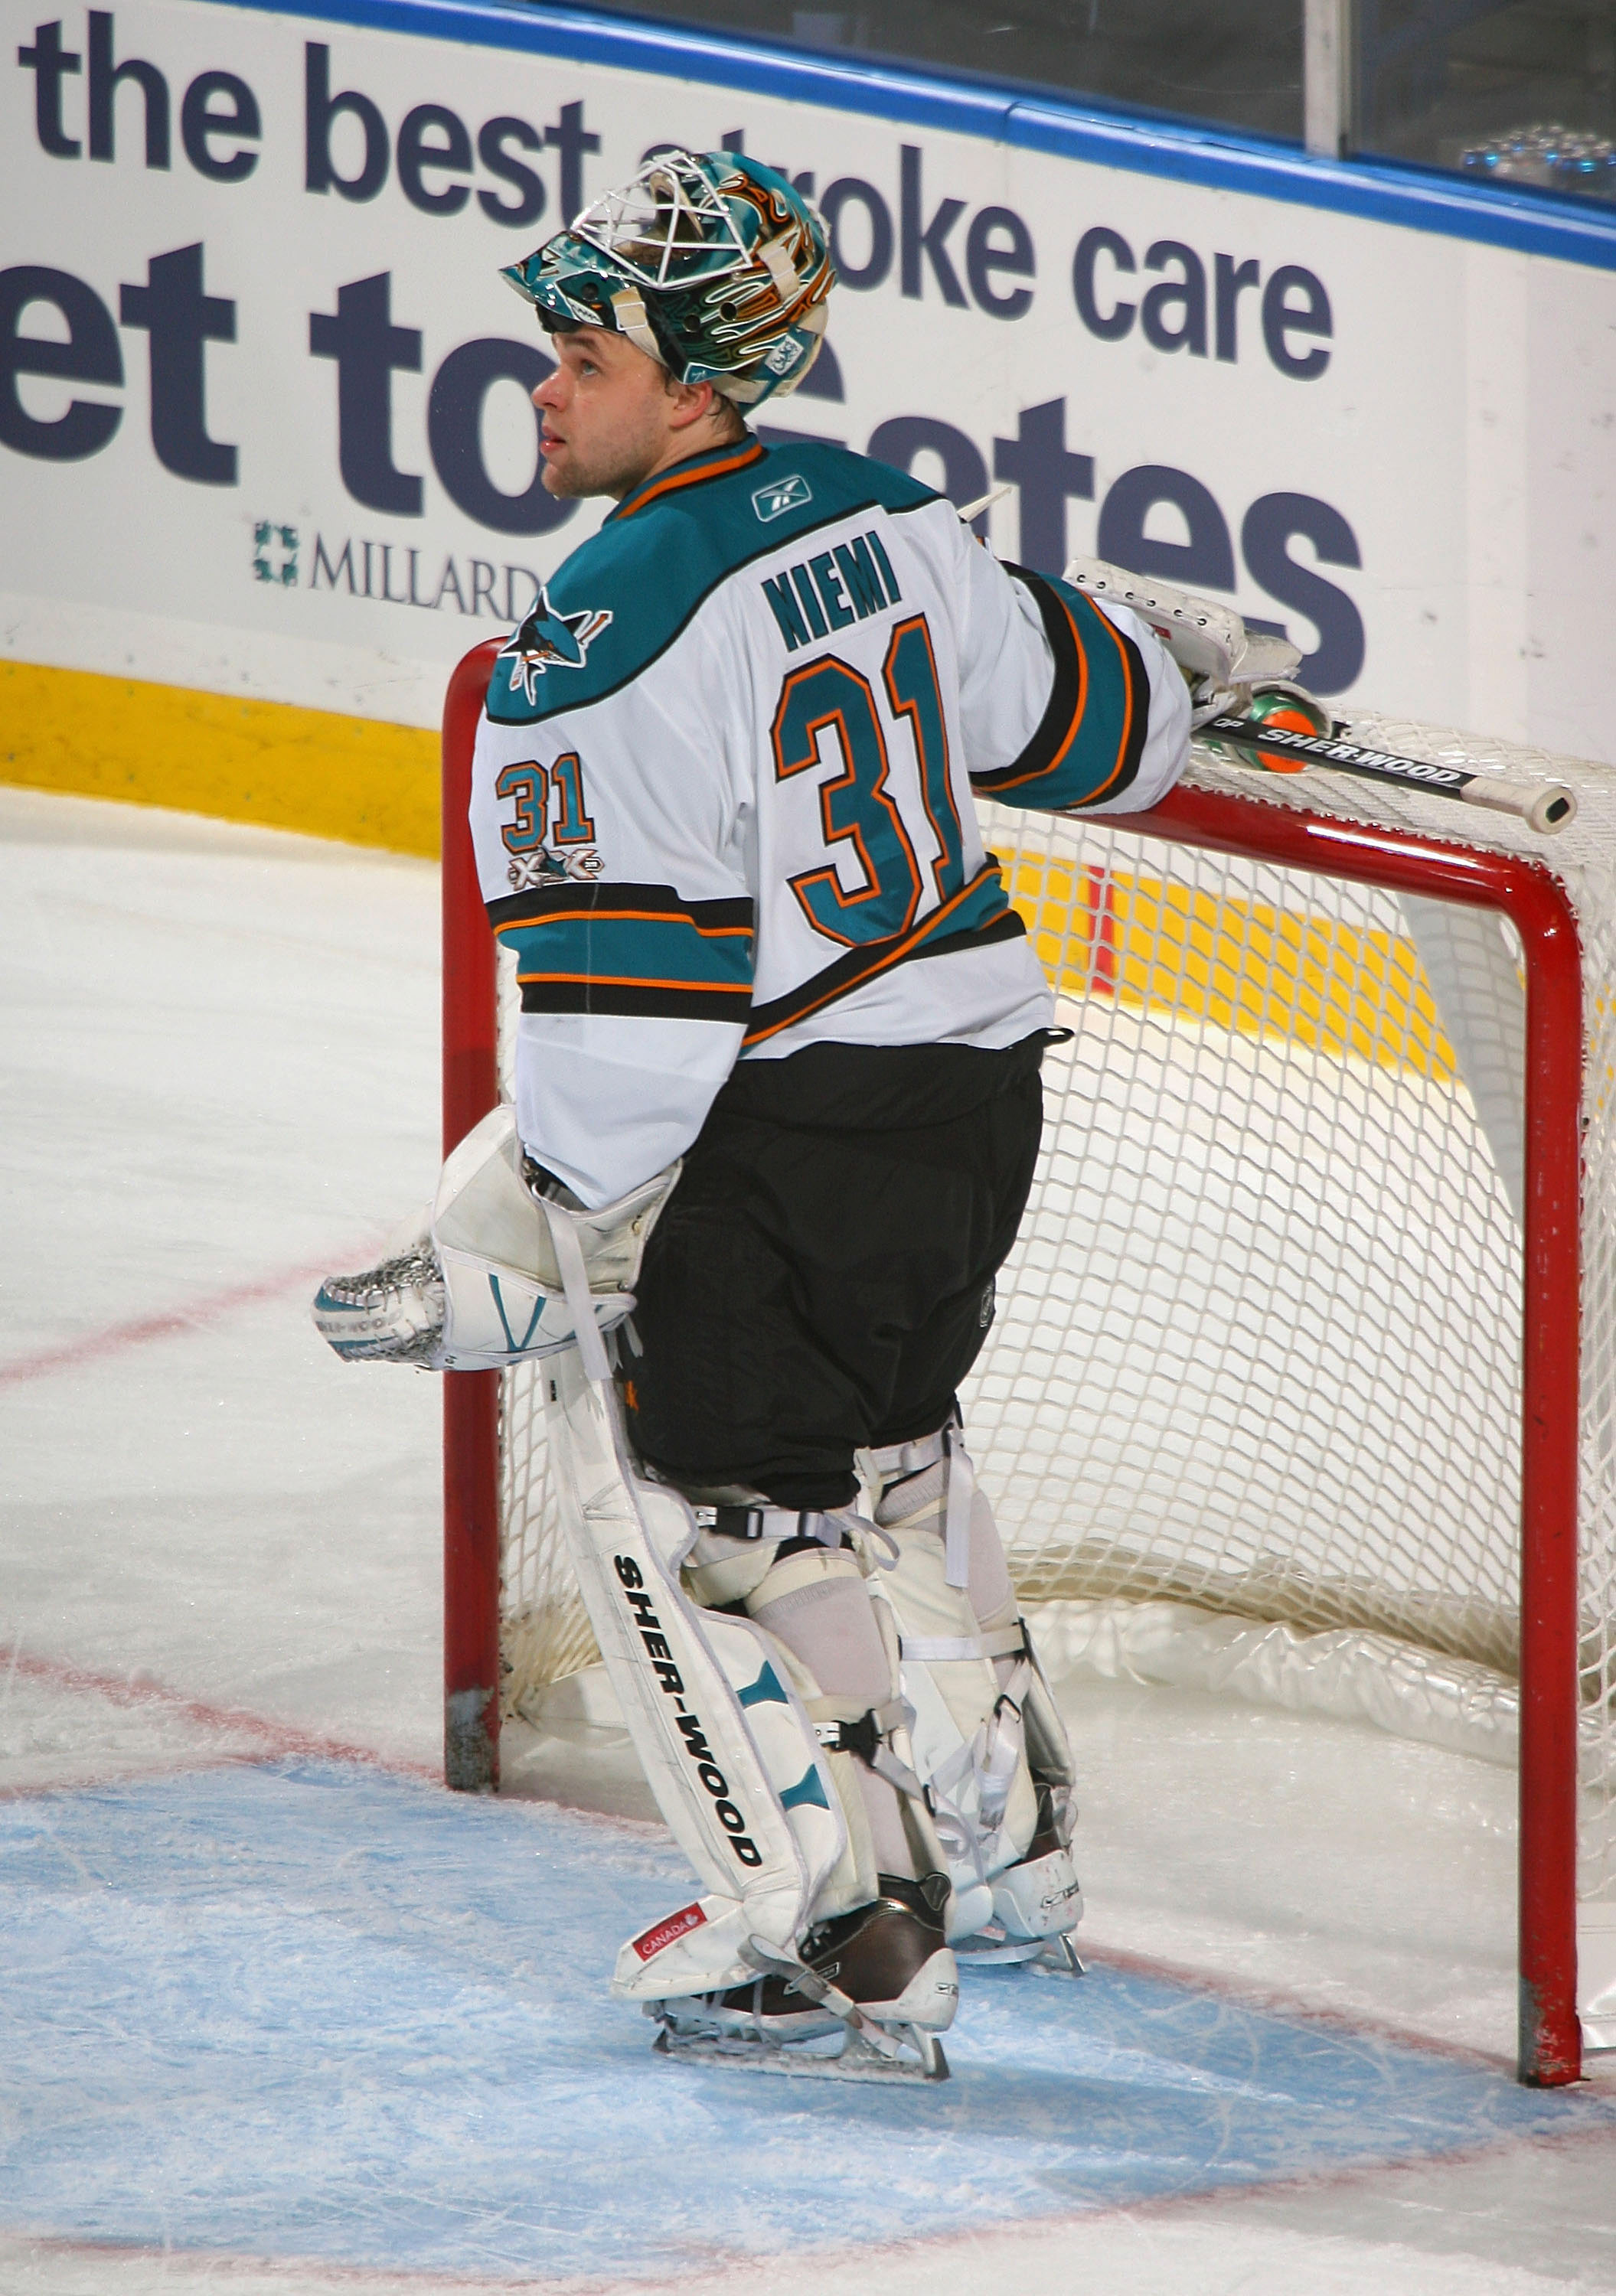 BUFFALO, NY - DECEMBER 09:  Antti Niemi #31 of the San Jose Sharks stands in goal during a timeout against  the Buffalo Sabres  at HSBC Arena on December 9, 2010 in Buffalo, New York.  (Photo by Rick Stewart/Getty Images)